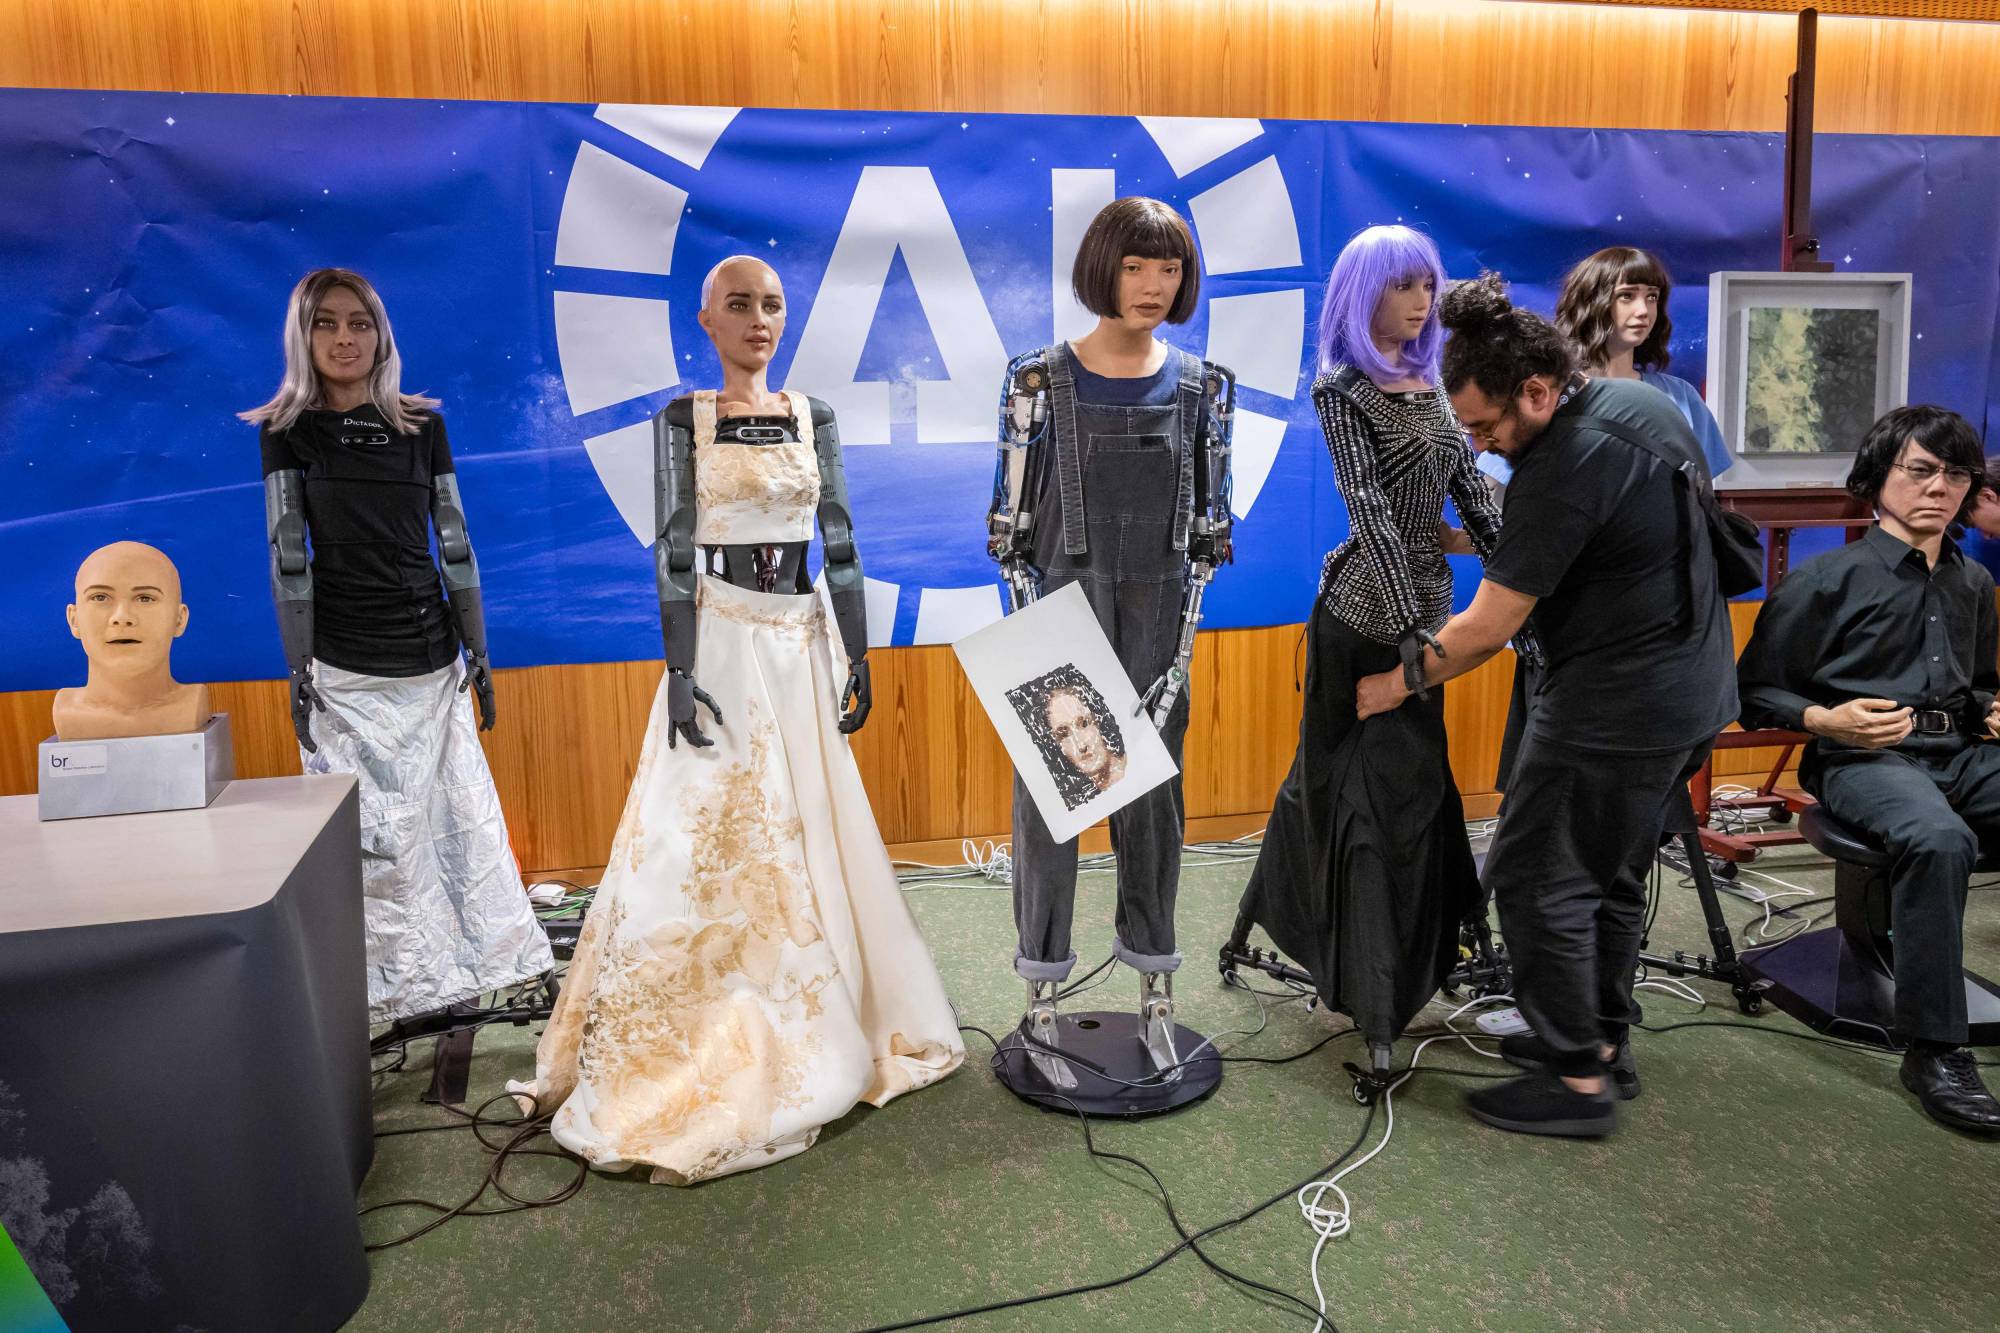 The head of AI robot Ameca (from left), CEO female robot Mika, AI robot Sophia, 'Ultra-realistic artist' robot Ai-Da,' AI robot Desdemona, health care assistant robot Grace and teleoperated android Geminoid HI-2 are showcased during what was presented as the world's first news conference with a panel of AI-enabled humanoid social robots at the AI for Good Global Summit in Geneva on Friday. 